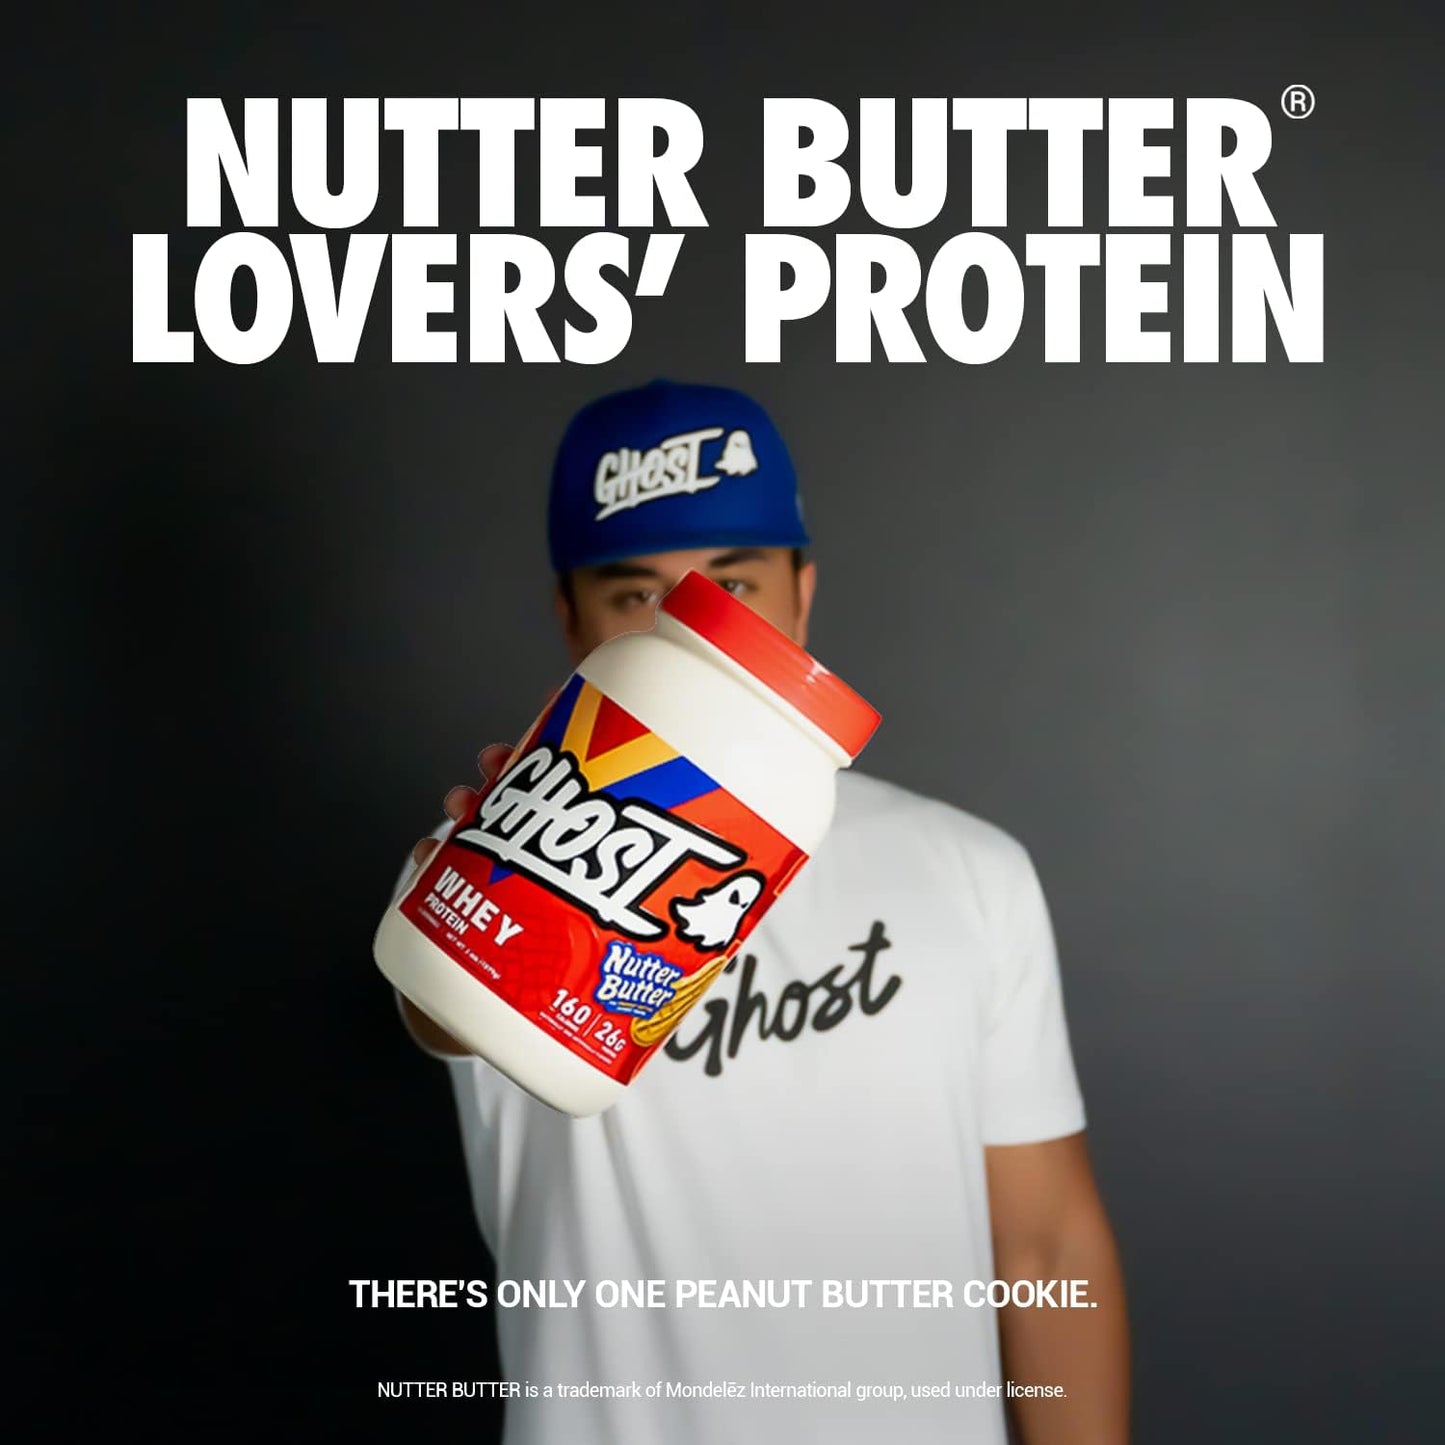 Ghost - Whey Protein Nutter Butter 1 kg